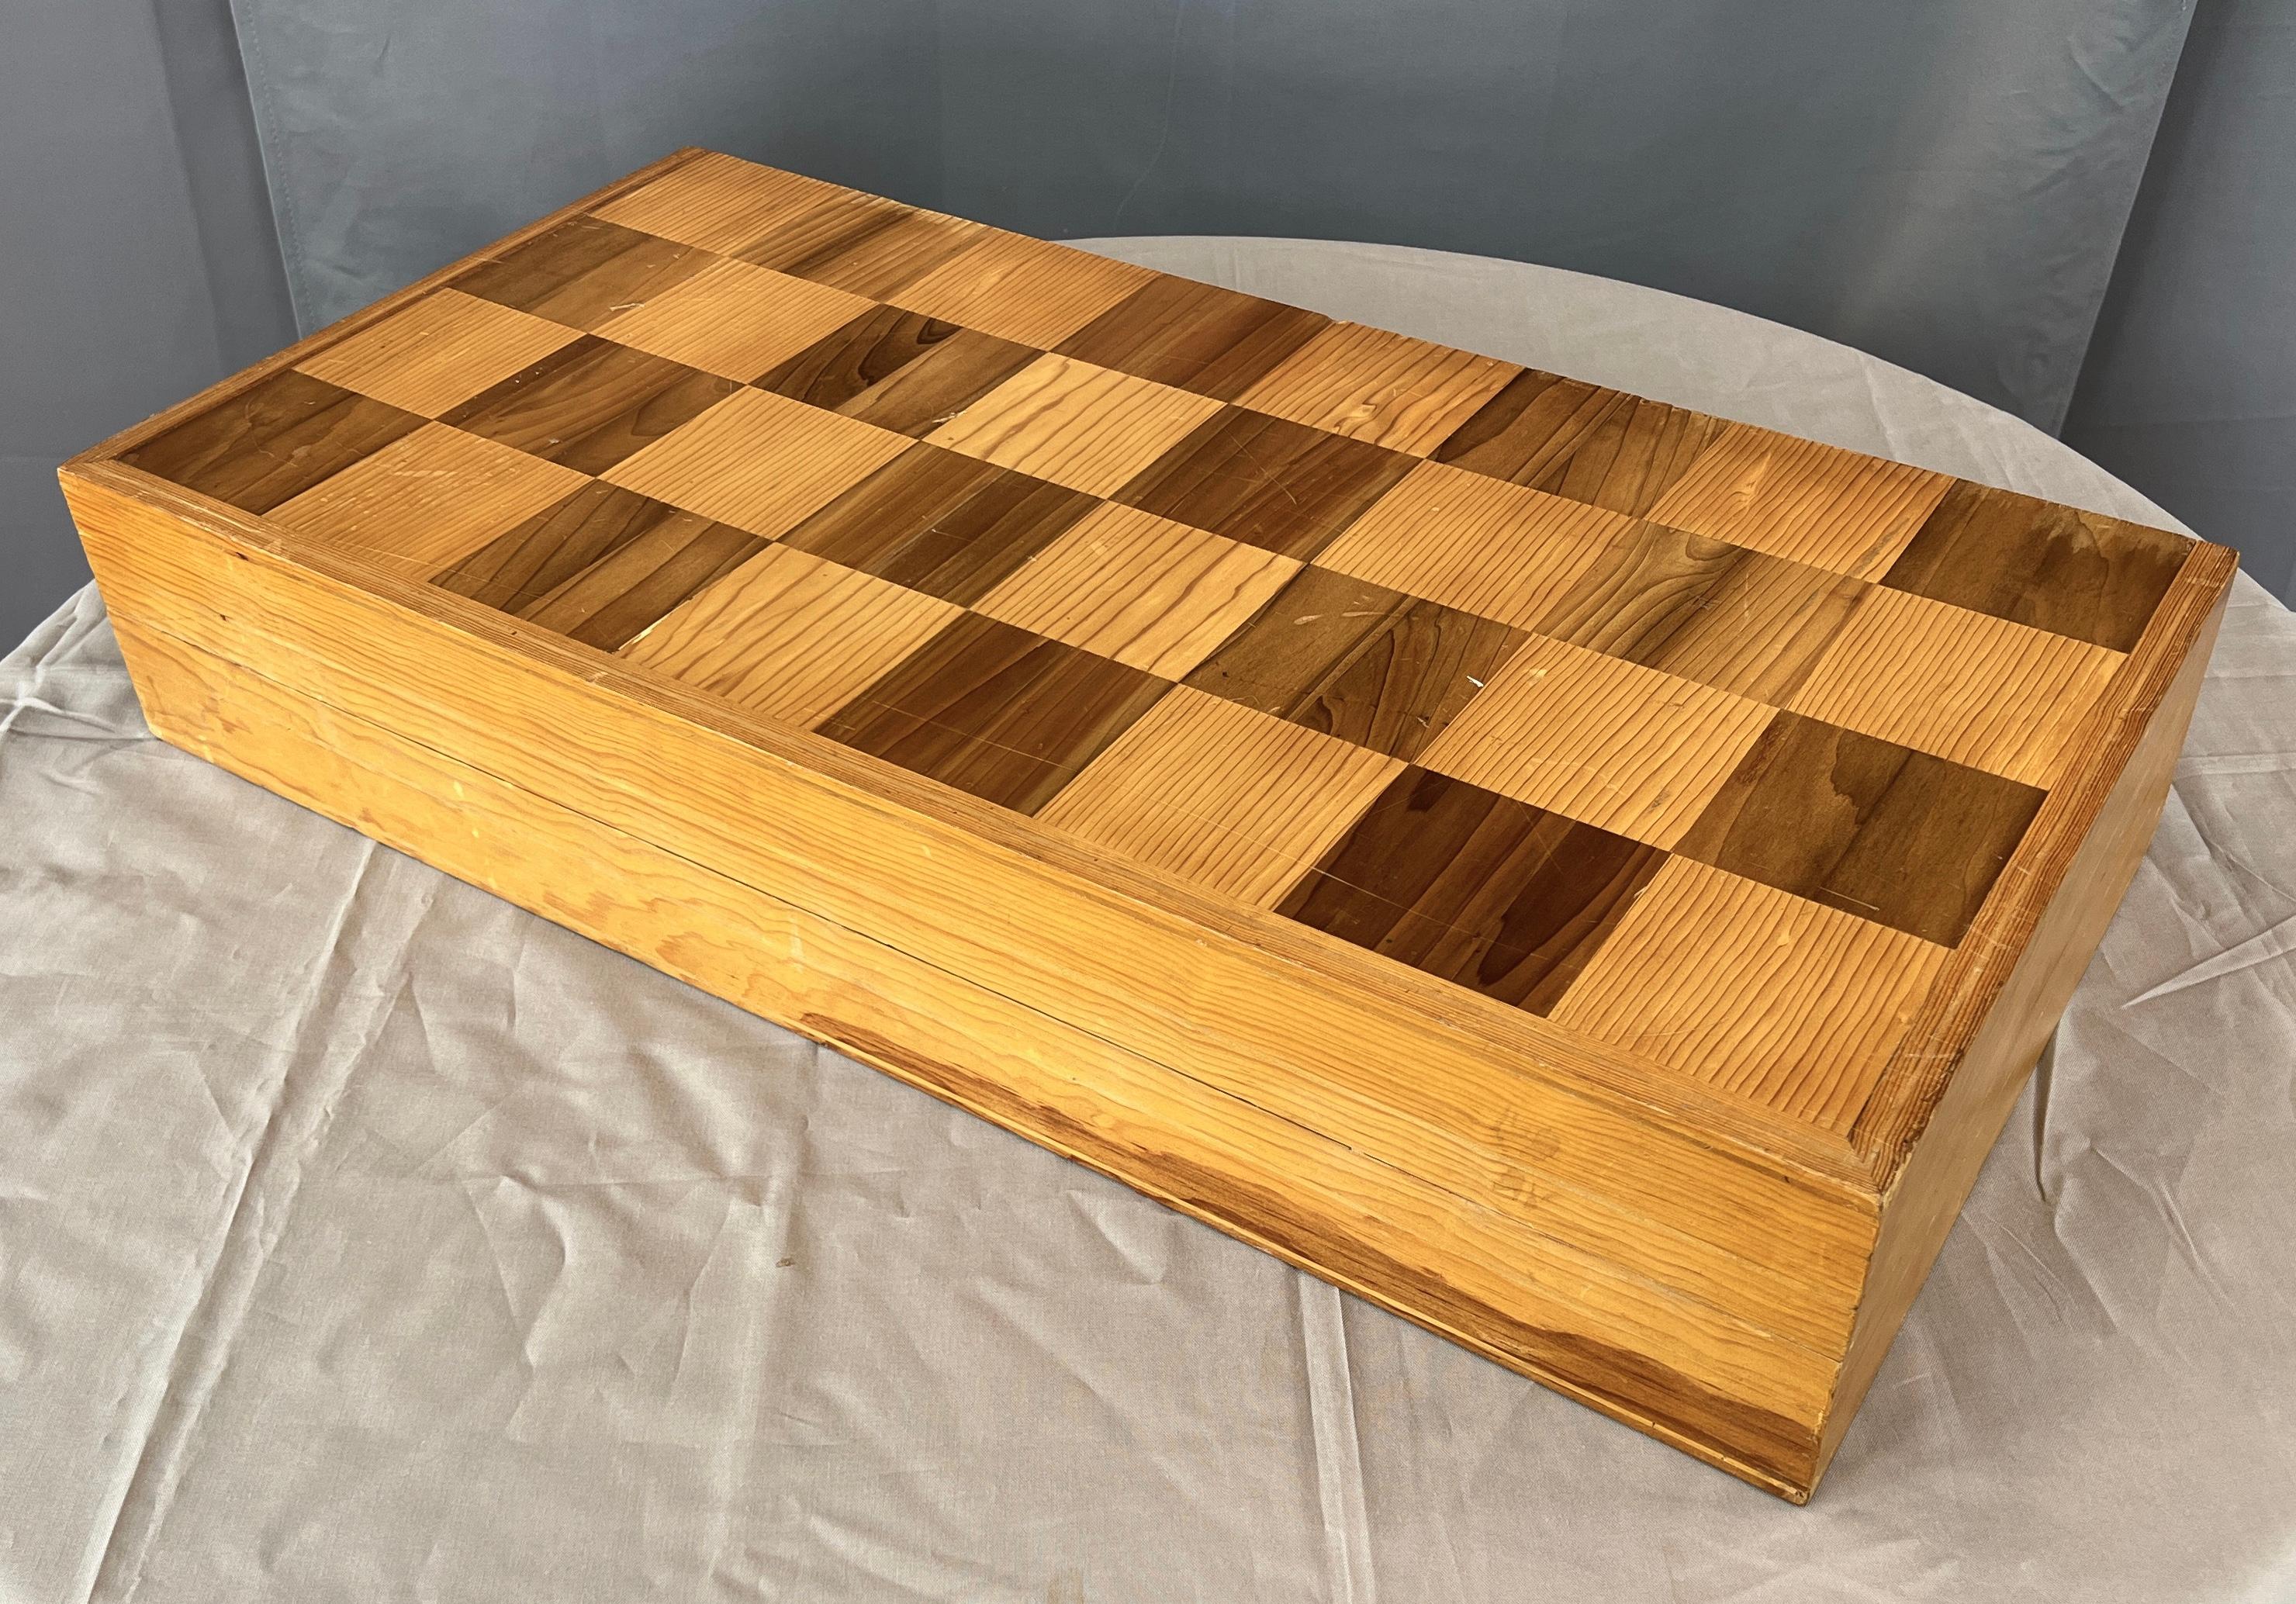 Unique & Monumental Hand Crafted Wooden Chess Set 33pc 5